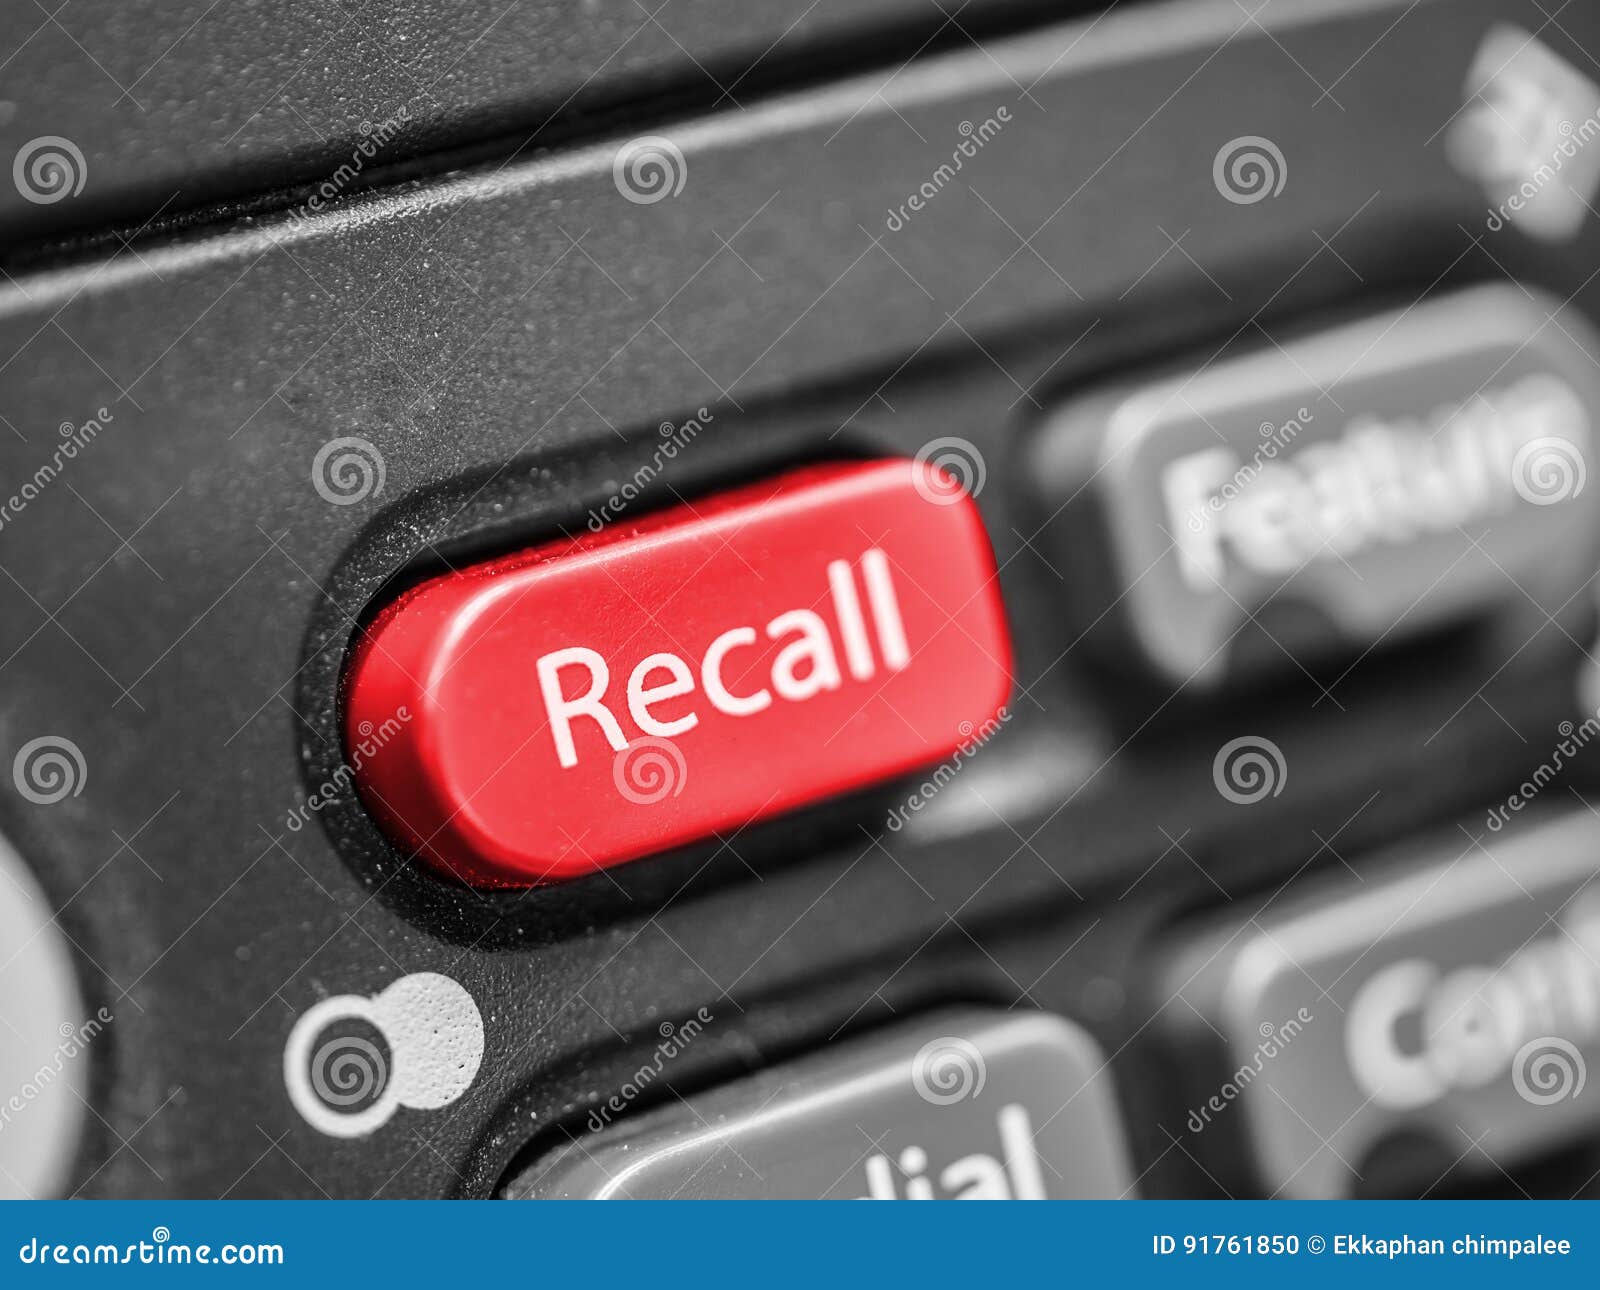 recall button of office telephone